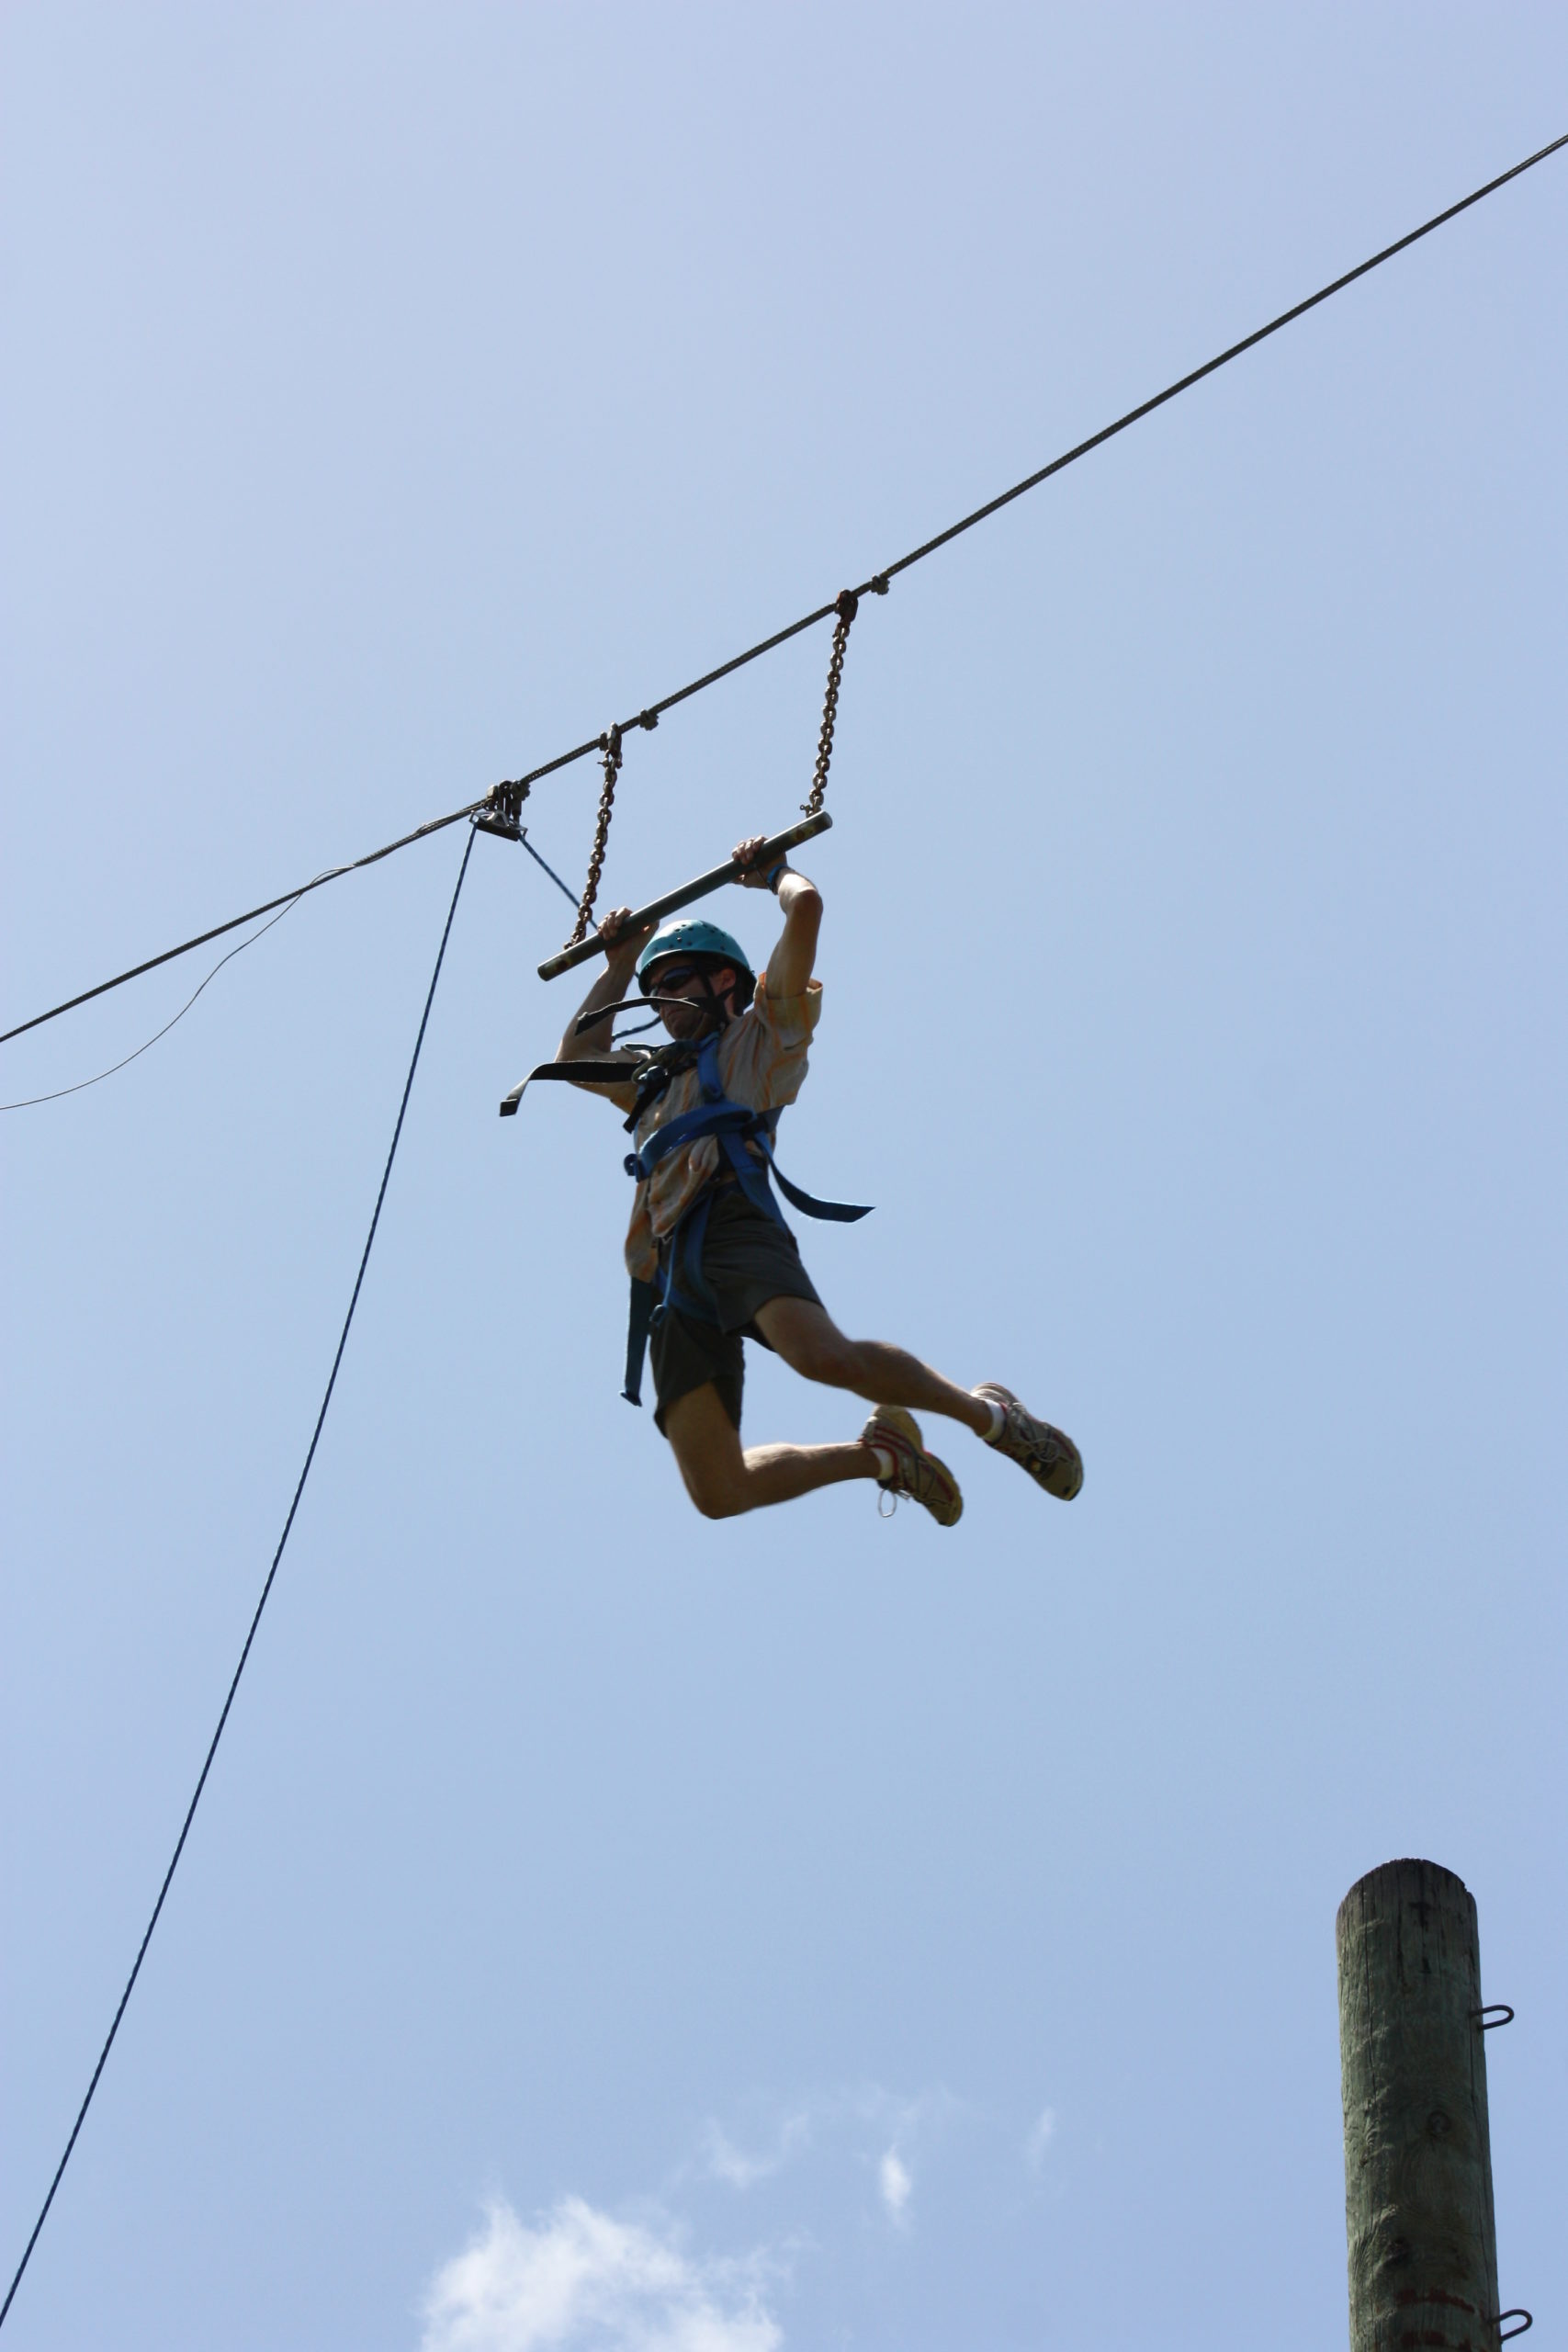 Mark on the trapeze